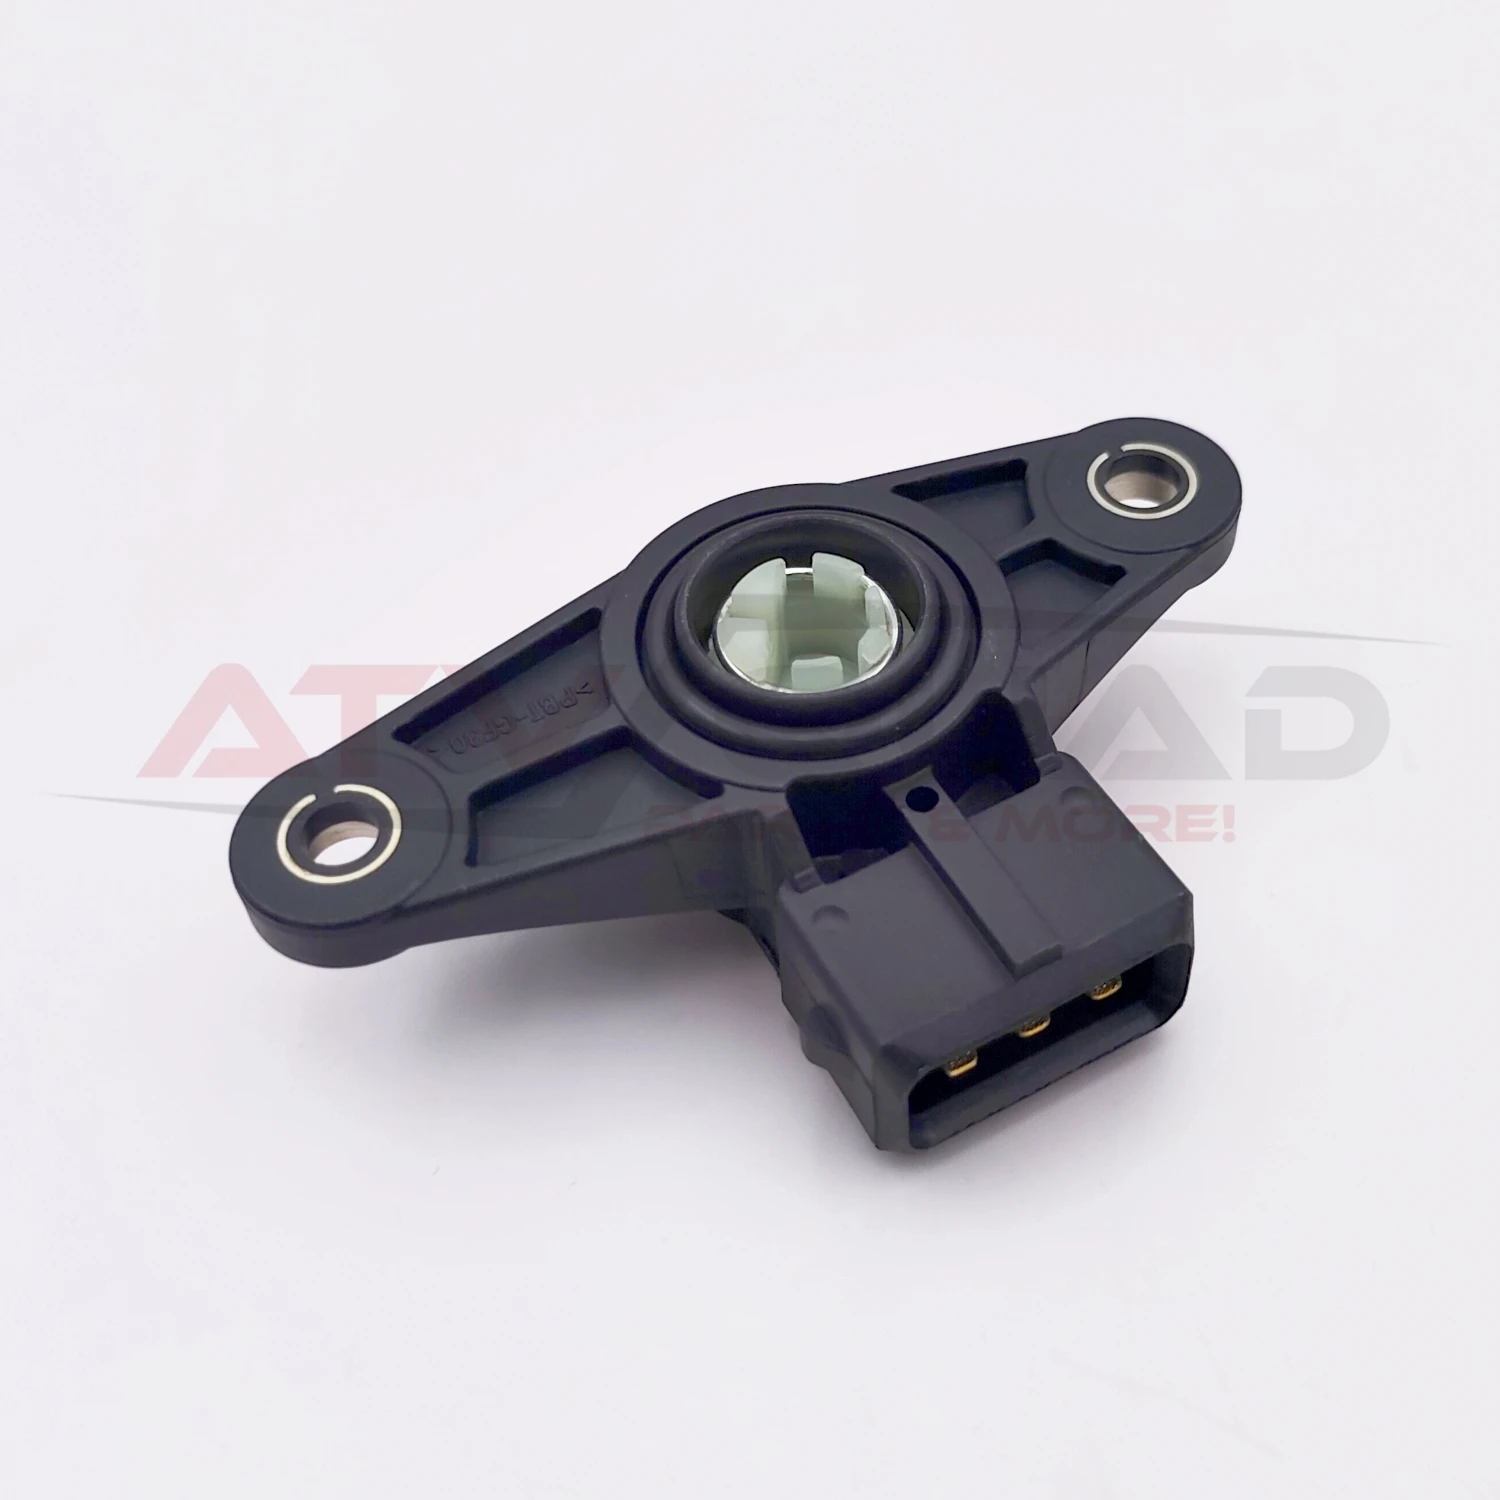 TPS Throttle Position Sensor for CFmoto 400NK 650NK 650MT 650GT Motorcycle 400 450 500S 520 600 Touring 625 ATV motorcycle throttle position sensor tps 16060 k35 v01 16410 k97 901 for honda pcx150 srl115